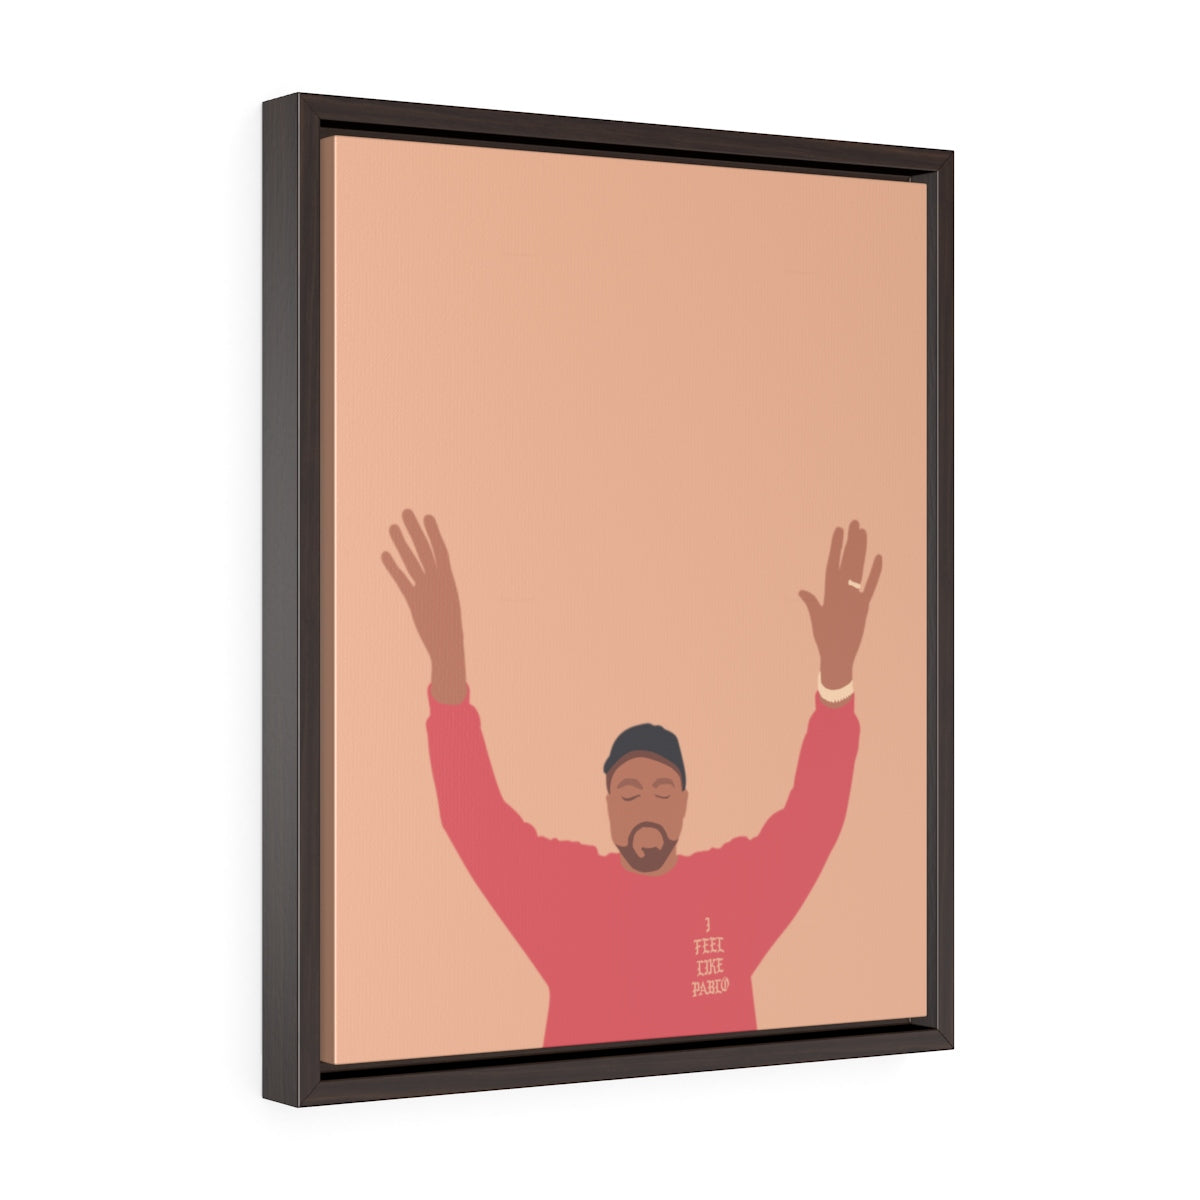 Kanye West I Feel Like Pablo Framed Premium Gallery Wrap Canvas - The Life of Pablo TLOP tour merch inspired-16″ × 20″-Premium Gallery Wraps (1.25″)-Walnut-Archethype